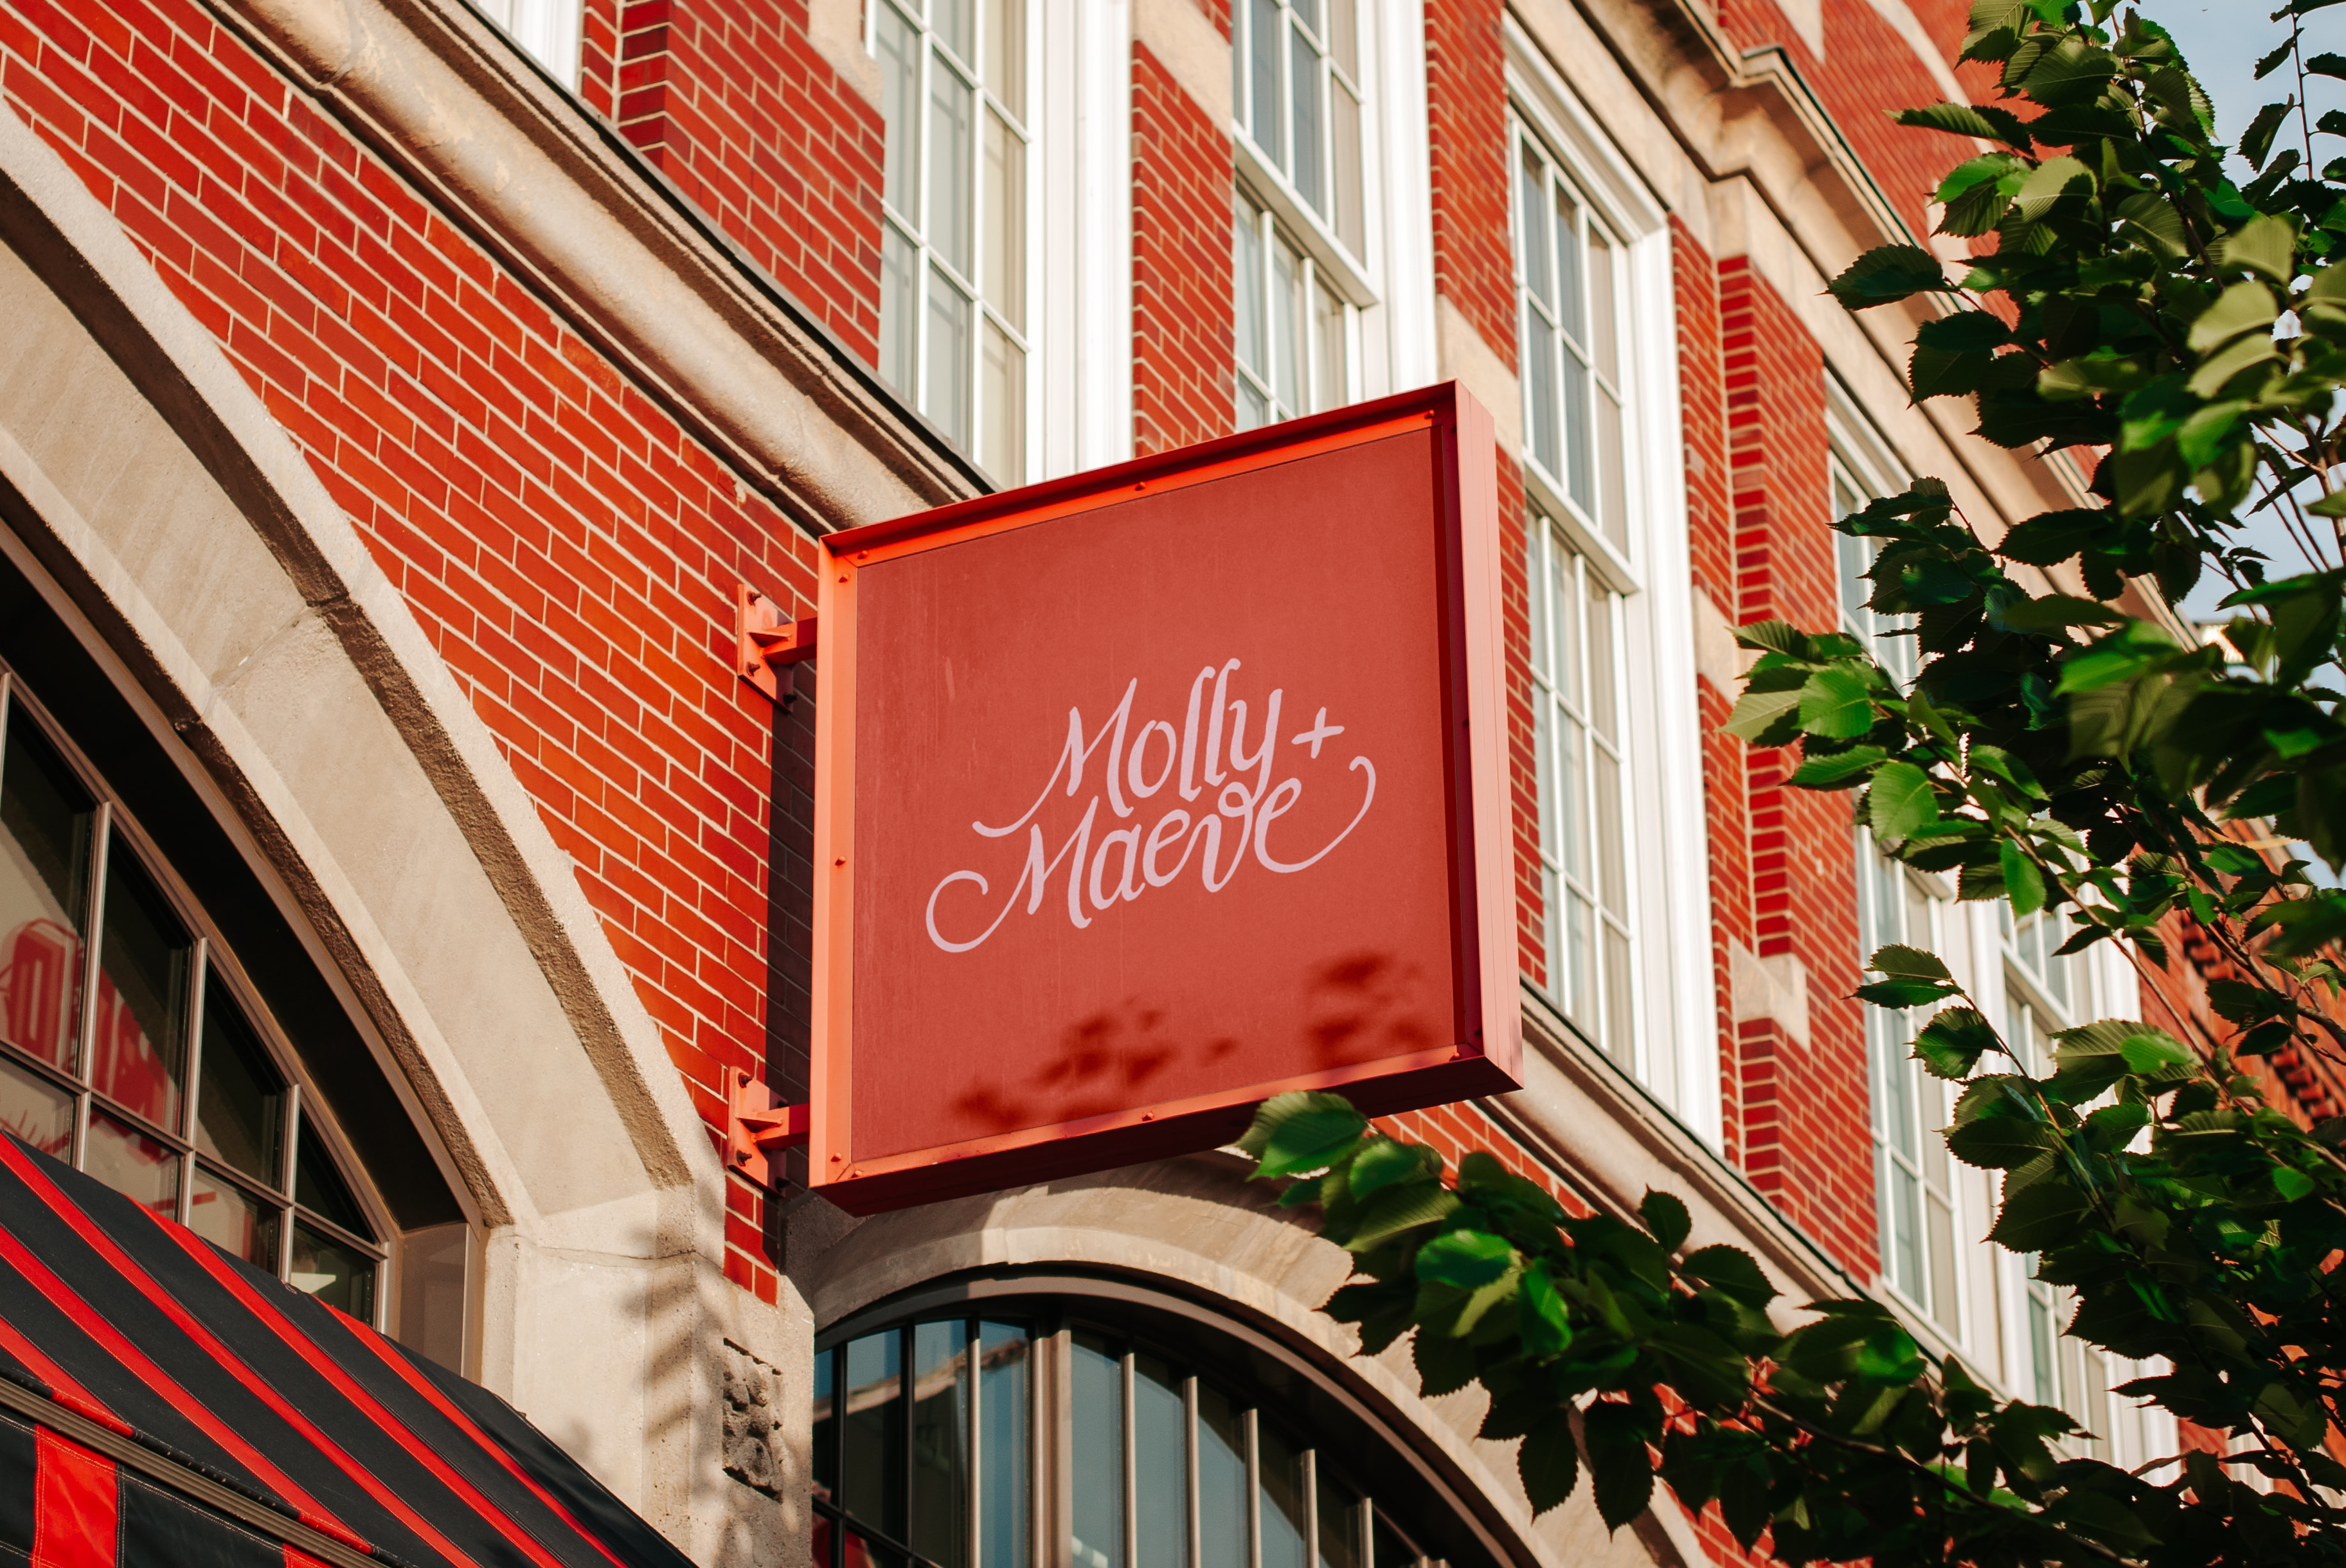 Molly and Maeve logo design on sign